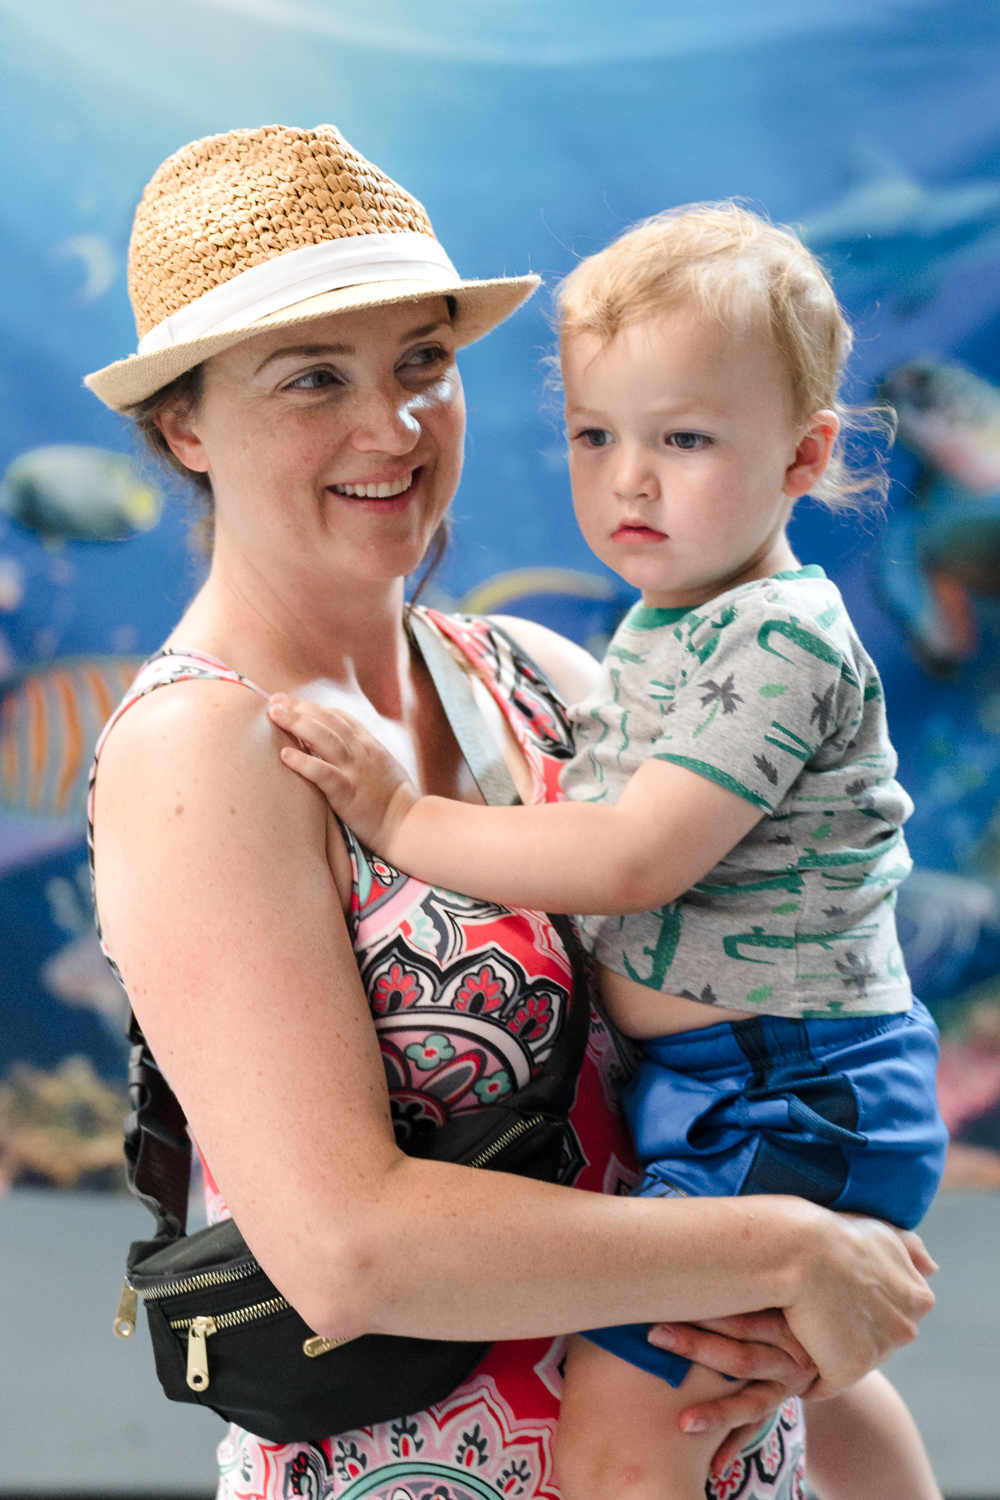 An adult holding a child in front of an ocean-themed backdrop